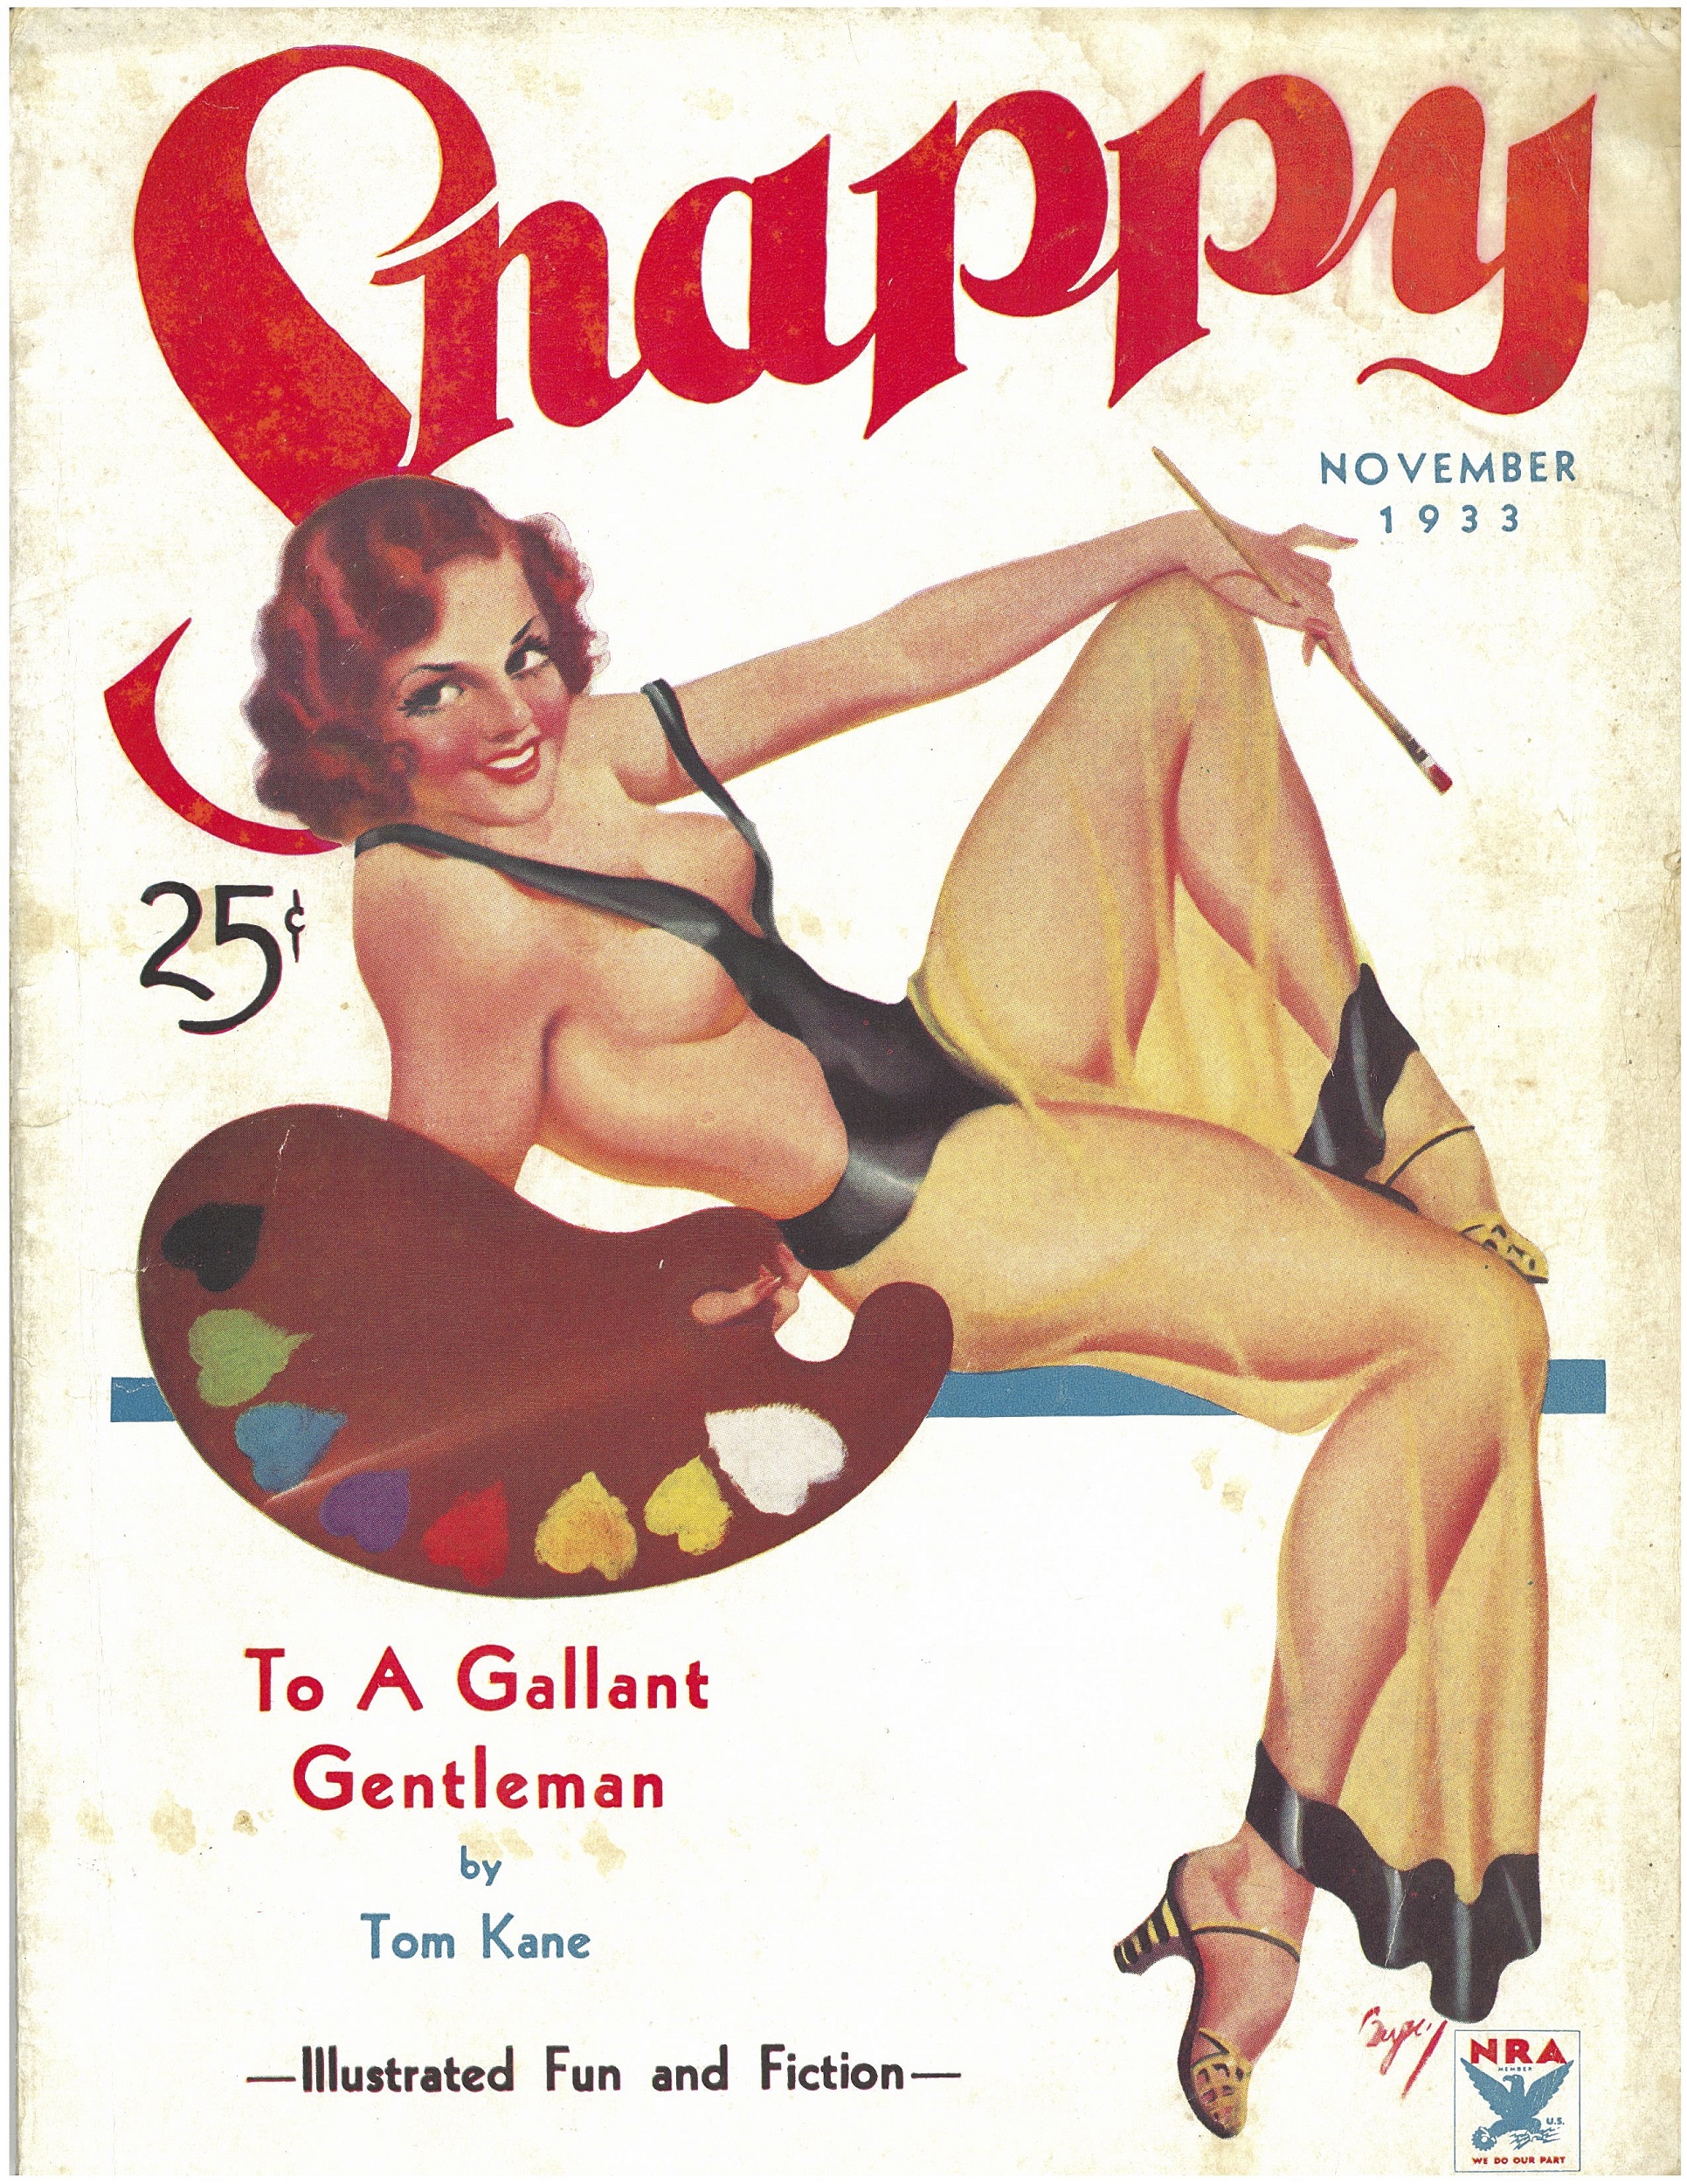 Cover of "Snappy" Magazine, showing a reclining woman in a sheer negligee holding a palette and paintbrush. Text beneath the palette reads "To a Gallant Gentleman / by Tom Kane"